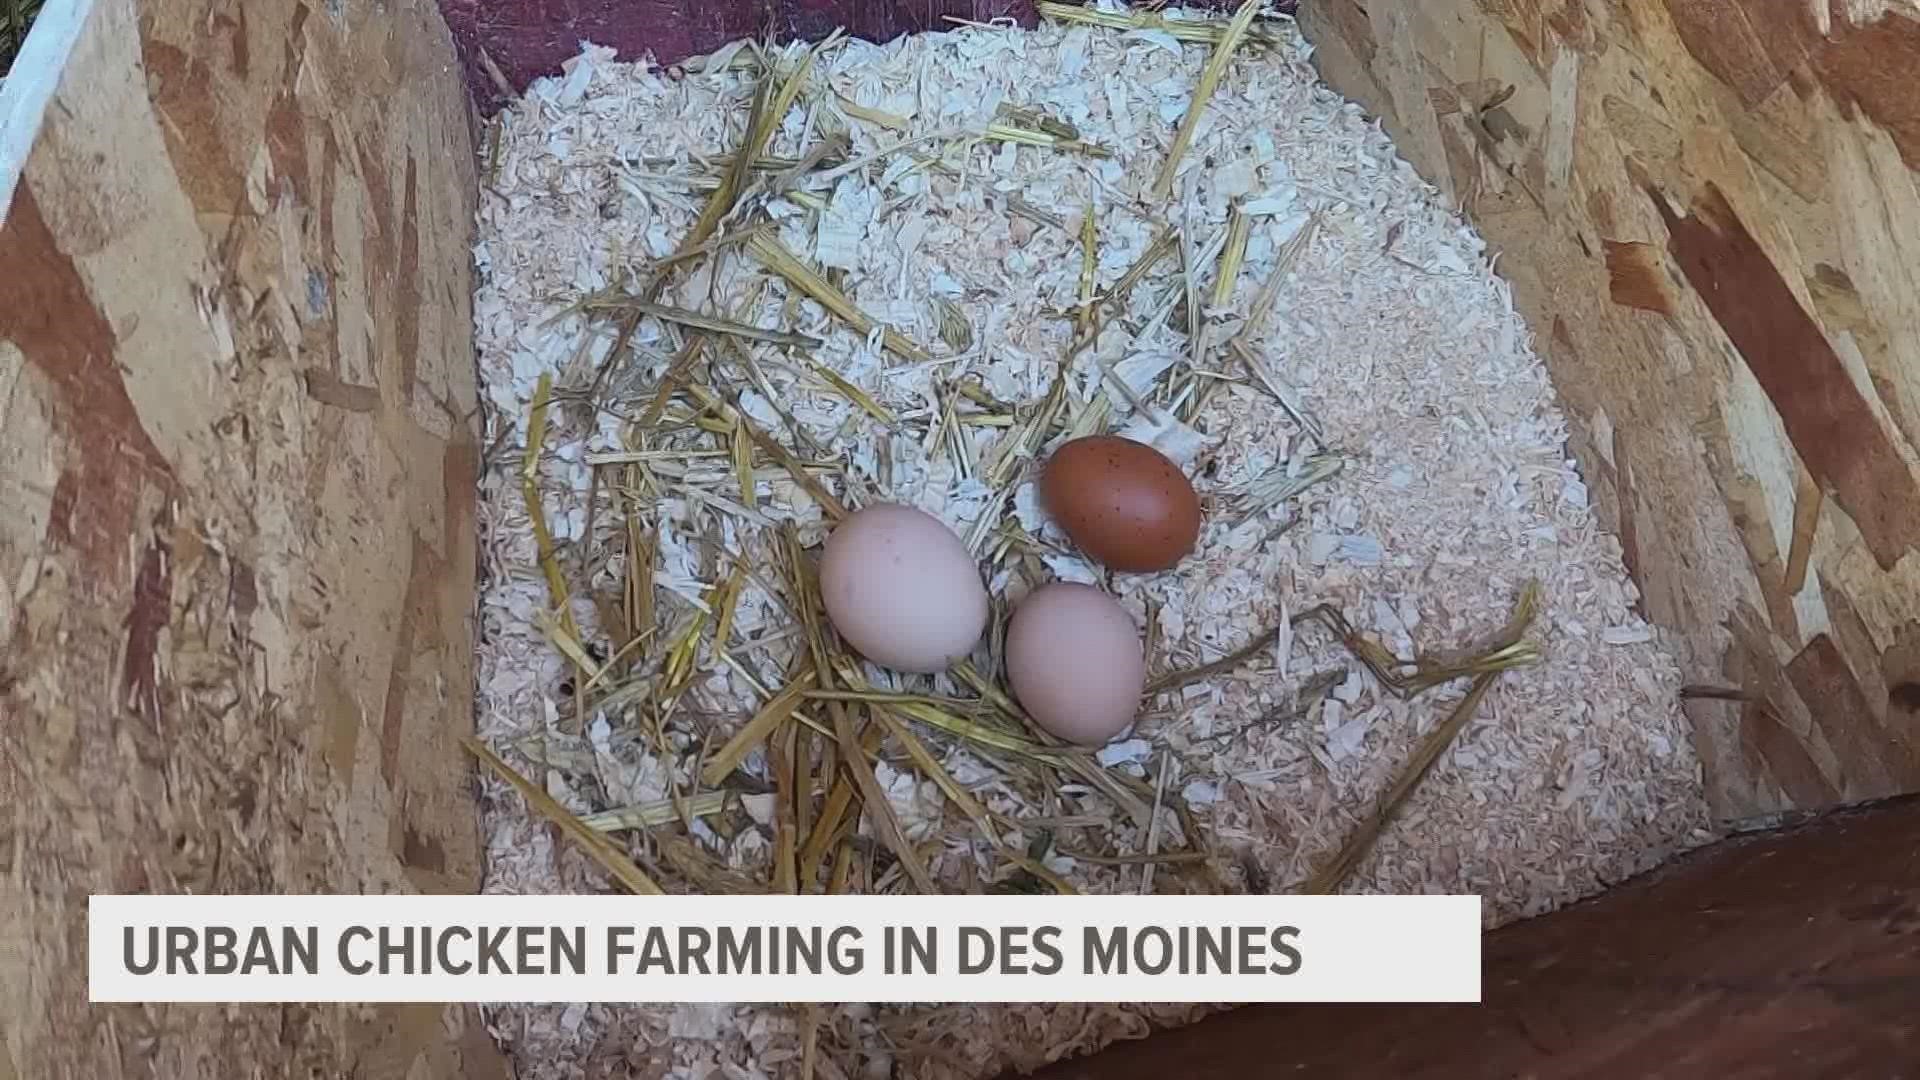 Jodi Valencia-Quezada and her husband have been raising chickens in Des Moines for four years.